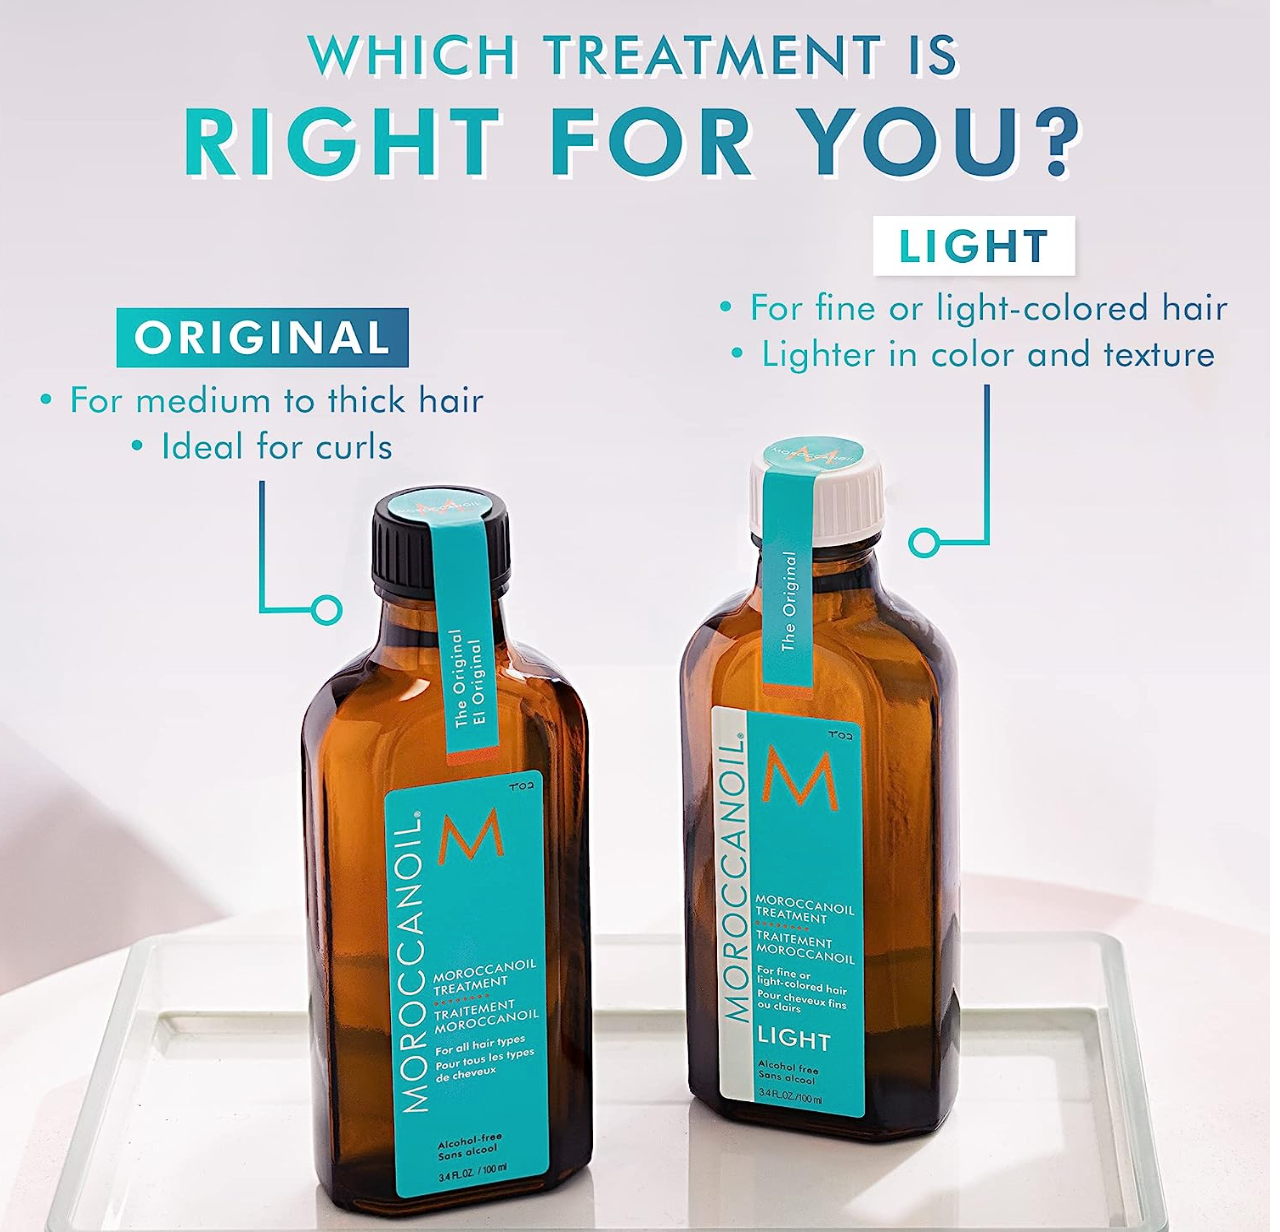 Moroccanoil Treatment Limited Edition Light